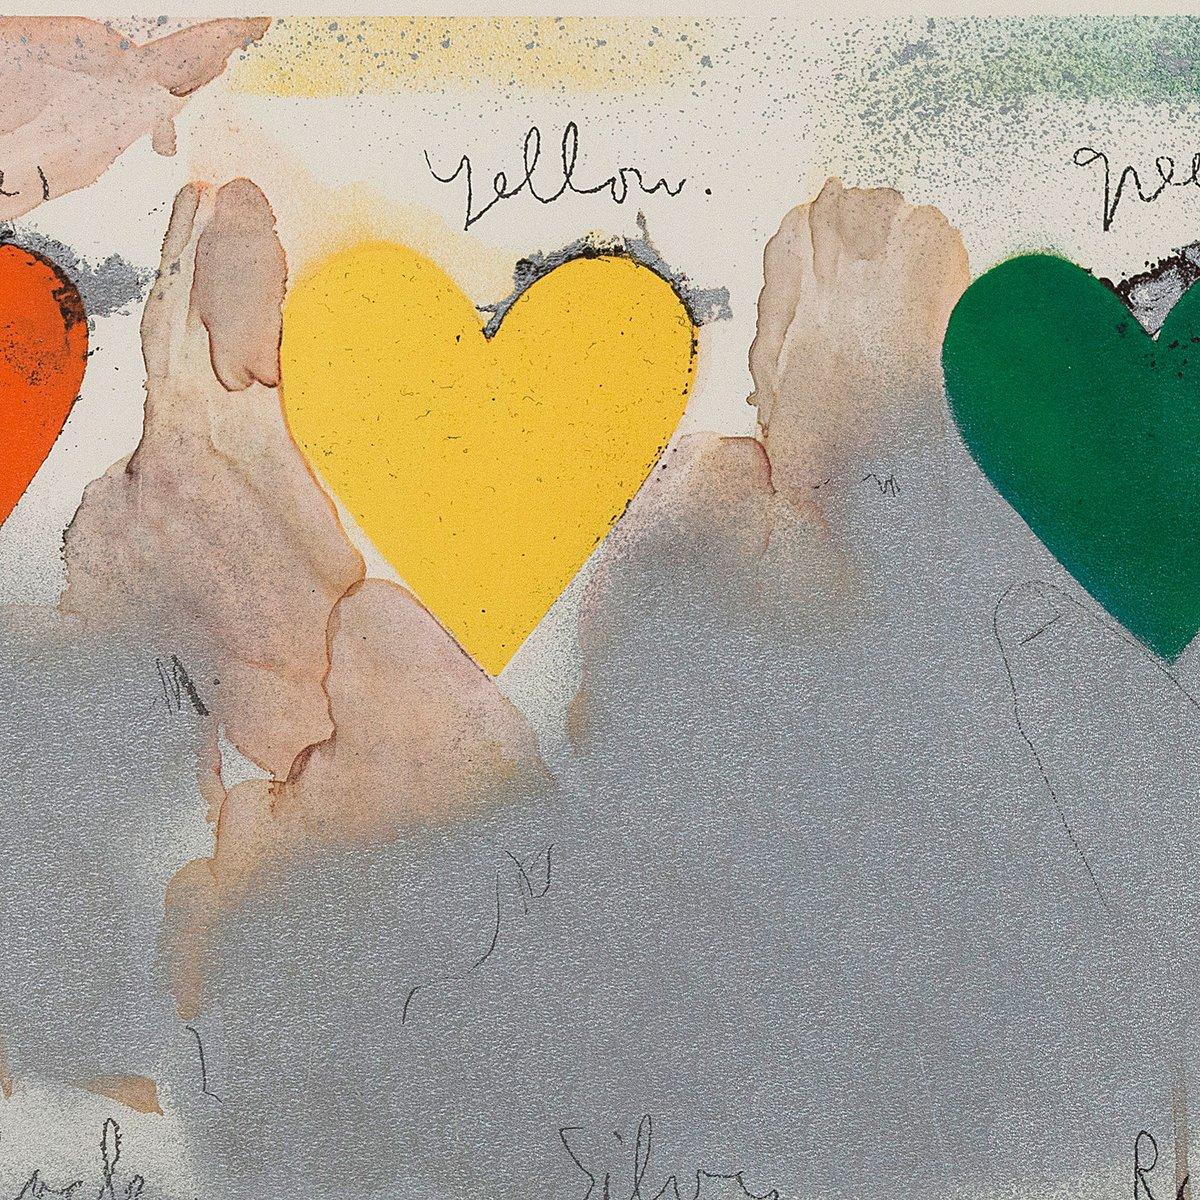 8 Hearts / Look, Off-set Lithograph with metallic paper collage overlay, 1970 3